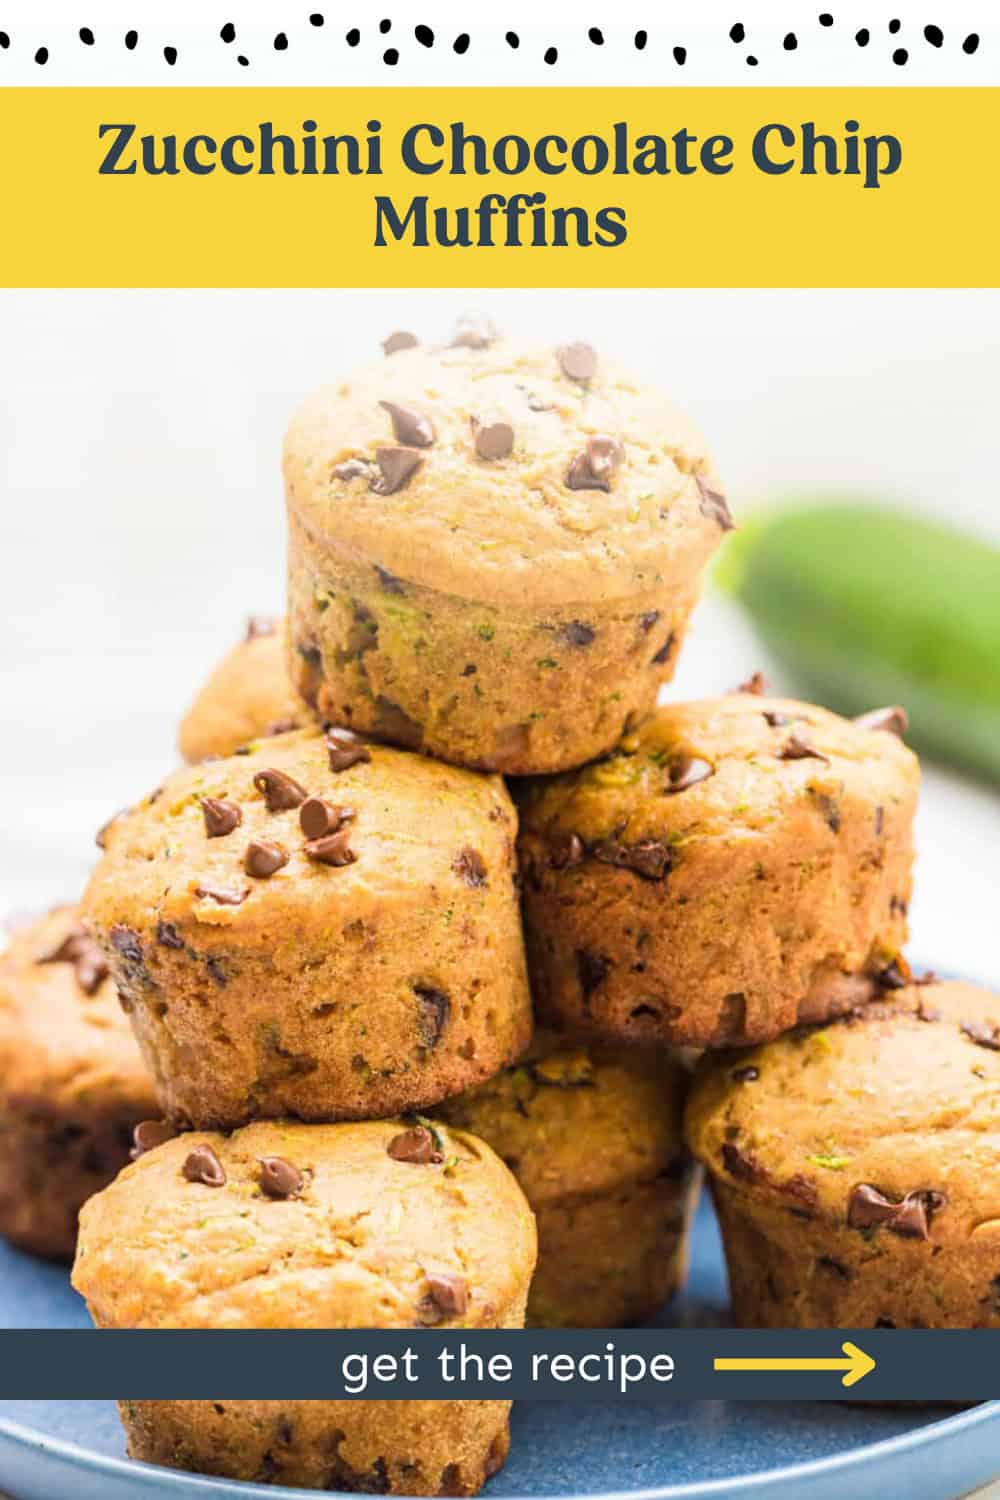 Zucchini chocolate chip muffins stacked on a plate.